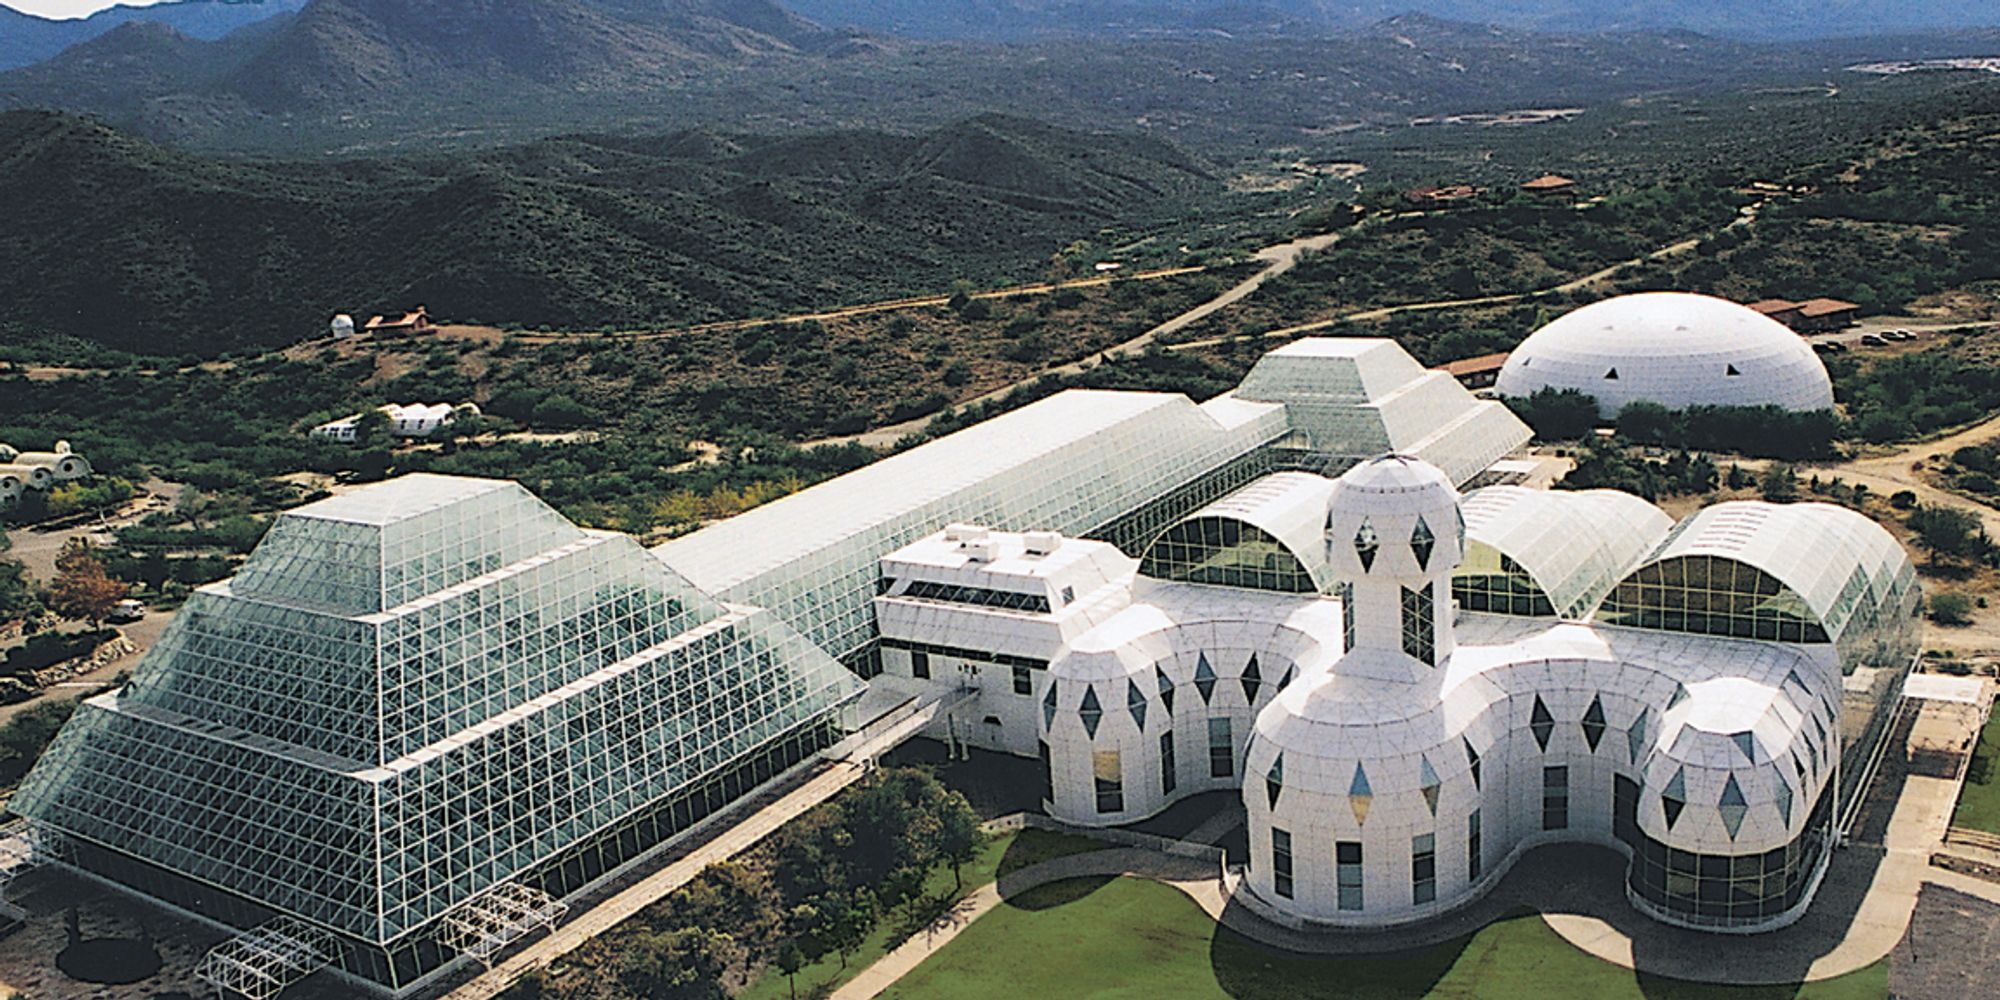 Biosphere 2: The World's Largest Earth Science Laboratory You've